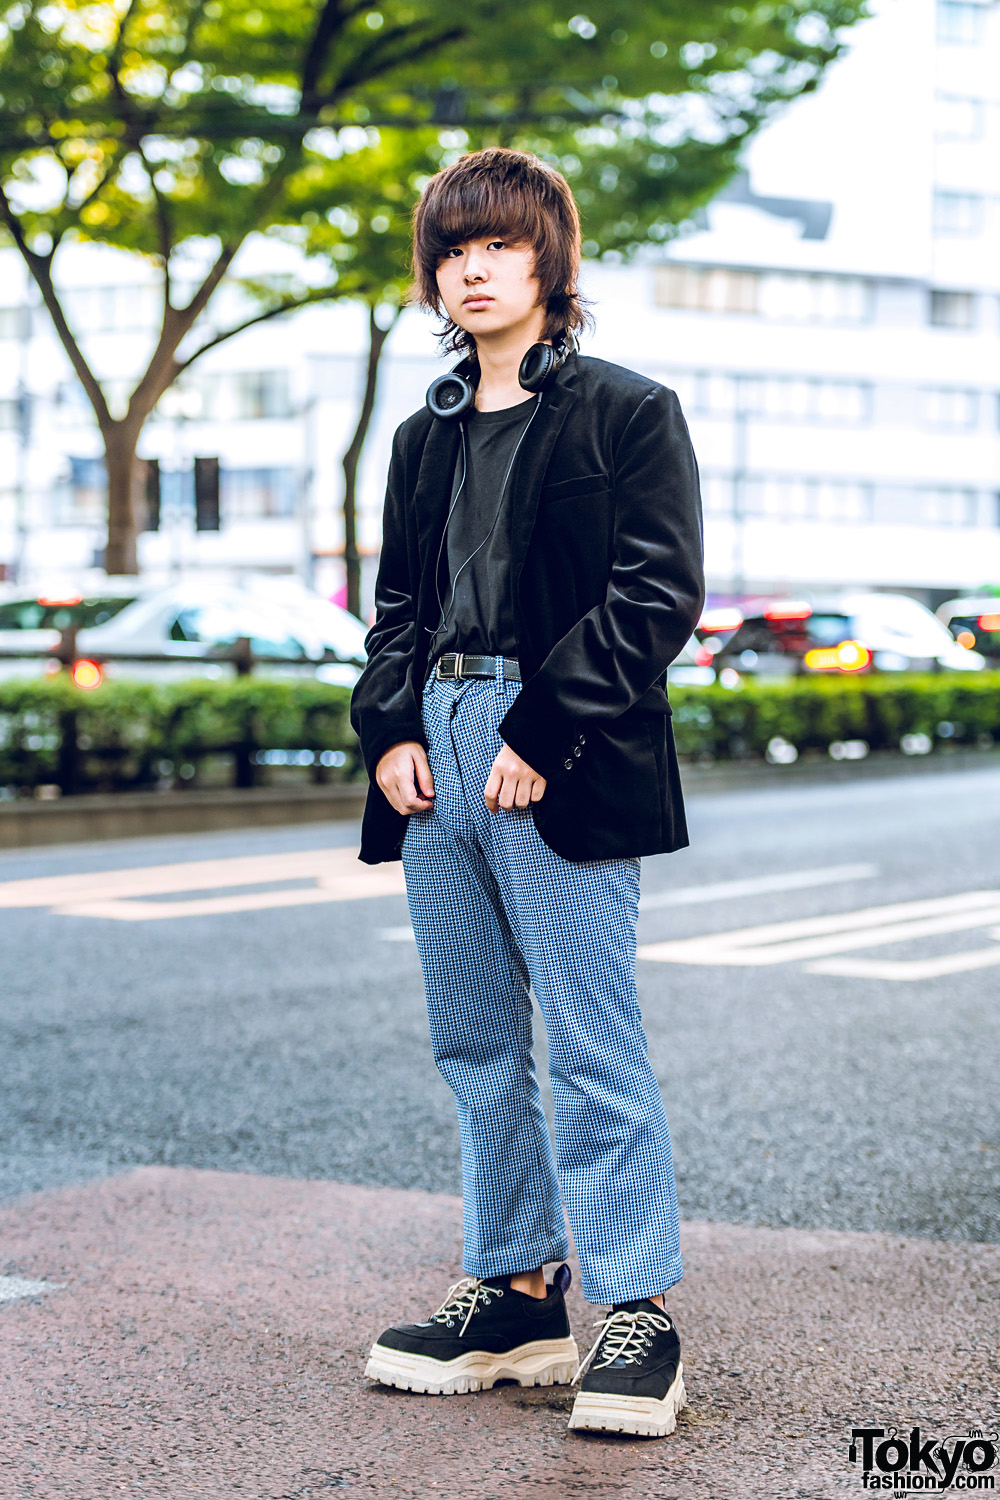 Harajuku Guy w/ Comme Ca Ism Blazer, Bucca44 Top, Vintage Houndstooth Pants & Sneakers – Fashion